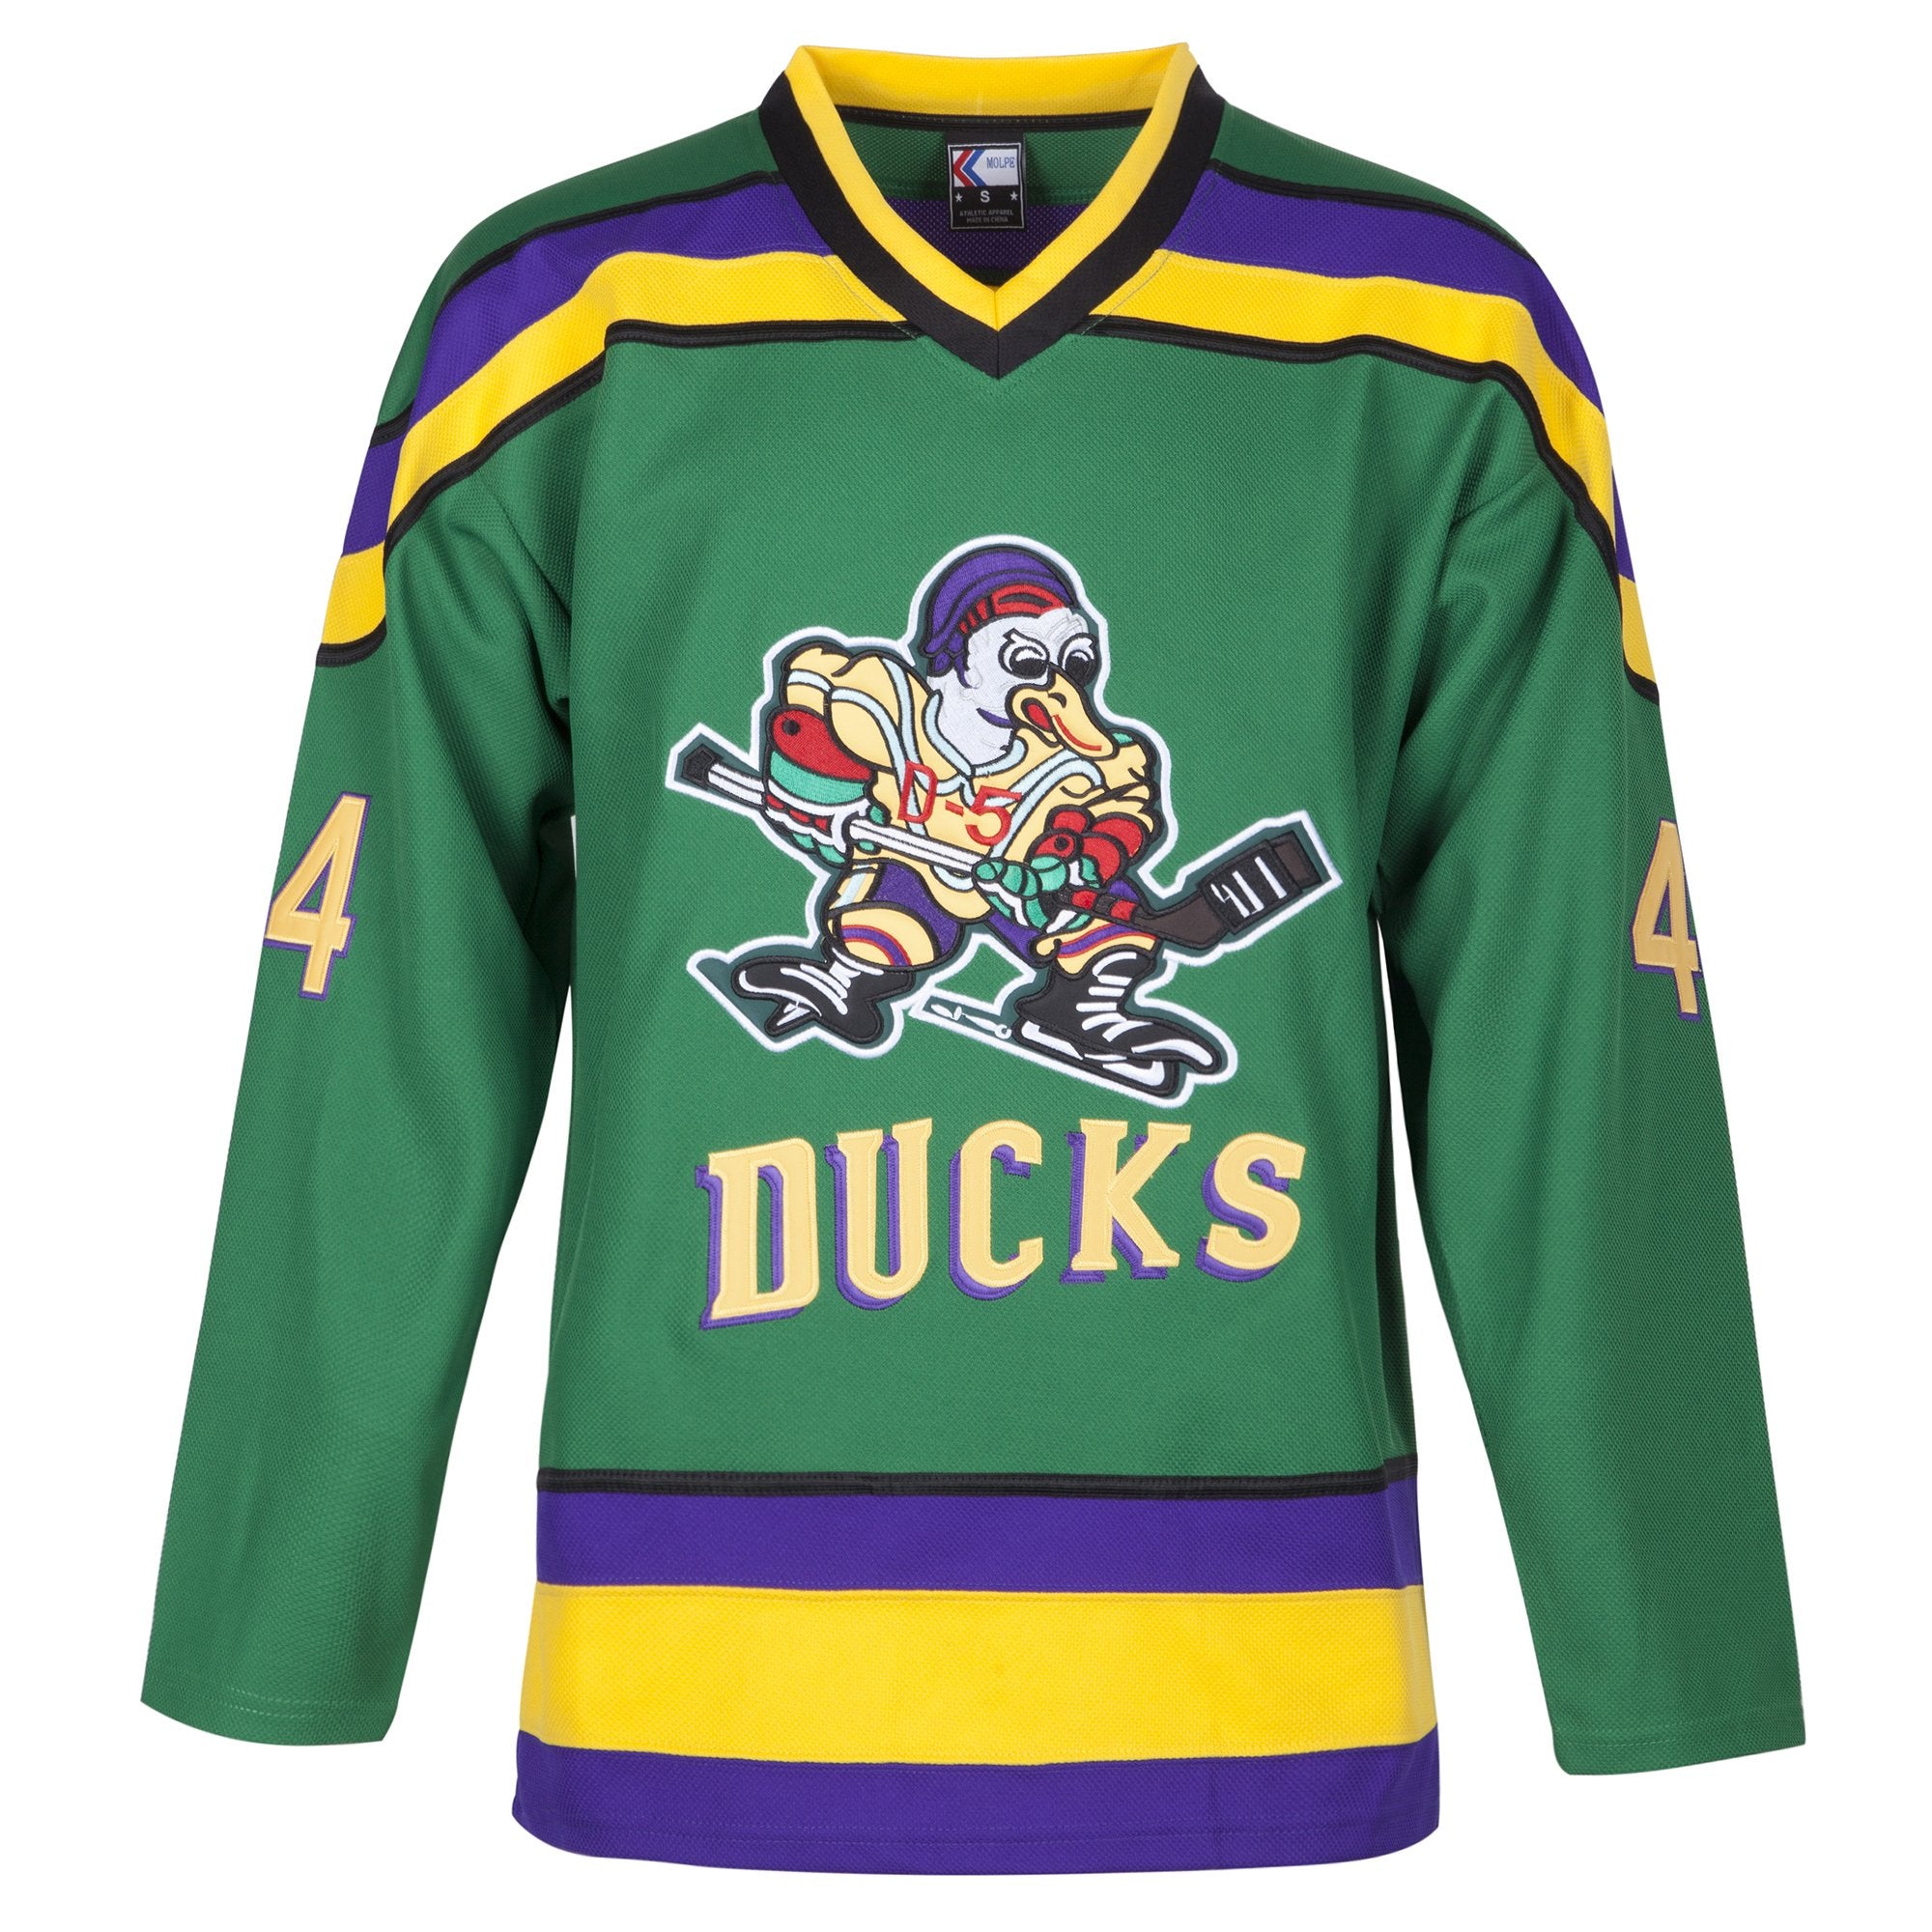 Fulton Reed #44 Mighty Ducks Hockey Jersey – 99Jersey®: Your Ultimate  Destination for Unique Jerseys, Shorts, and More